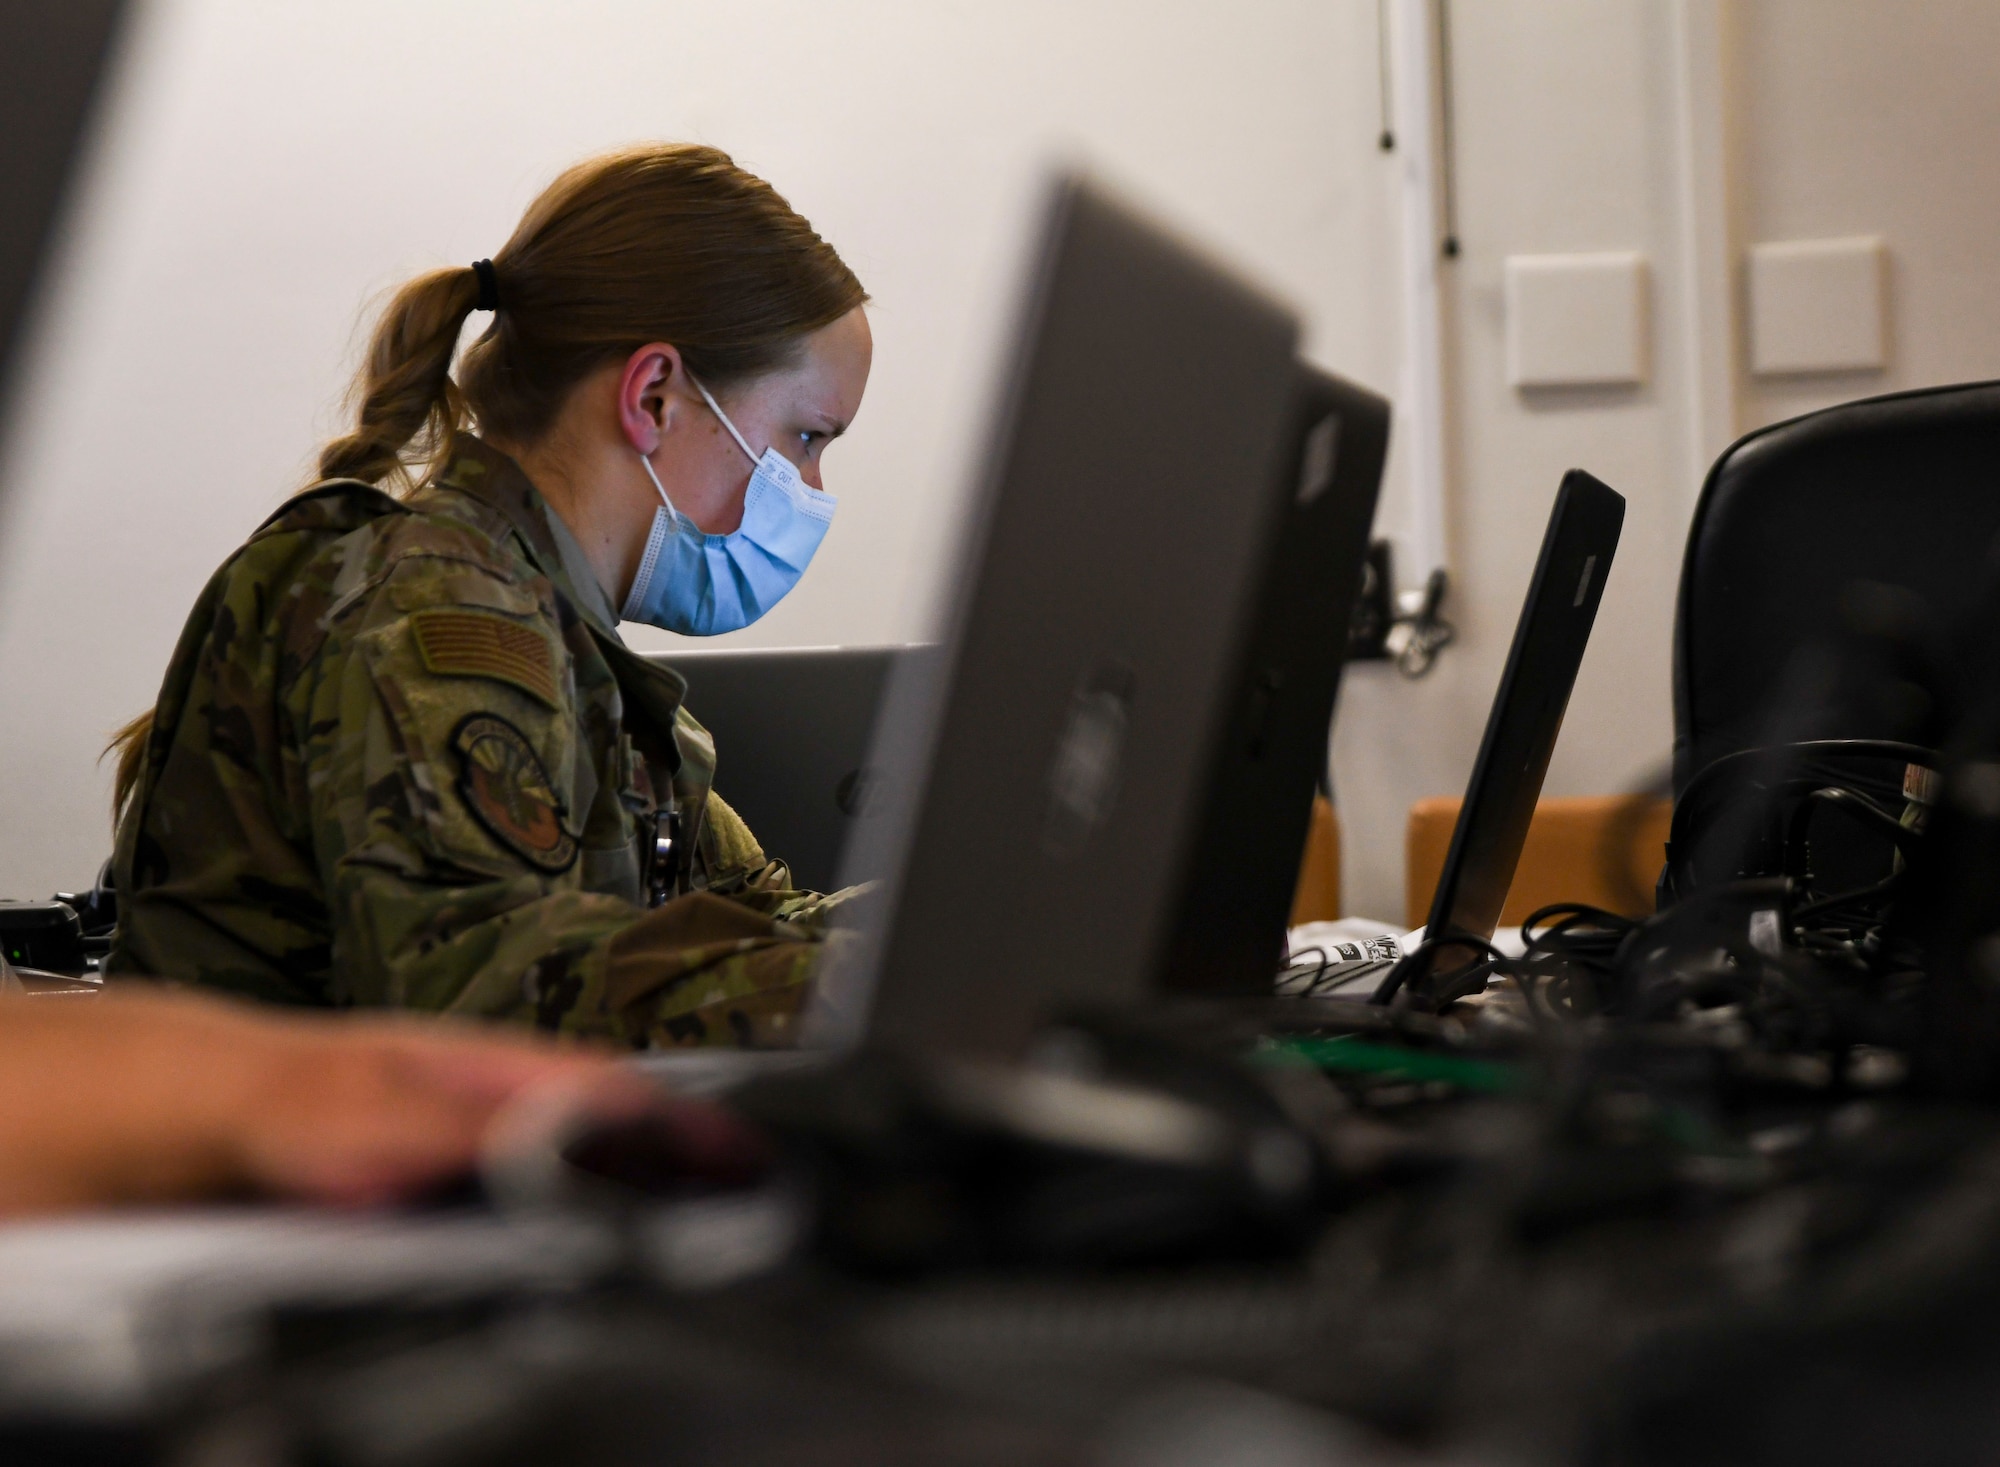 A photo of an airman sitting in front of a computer